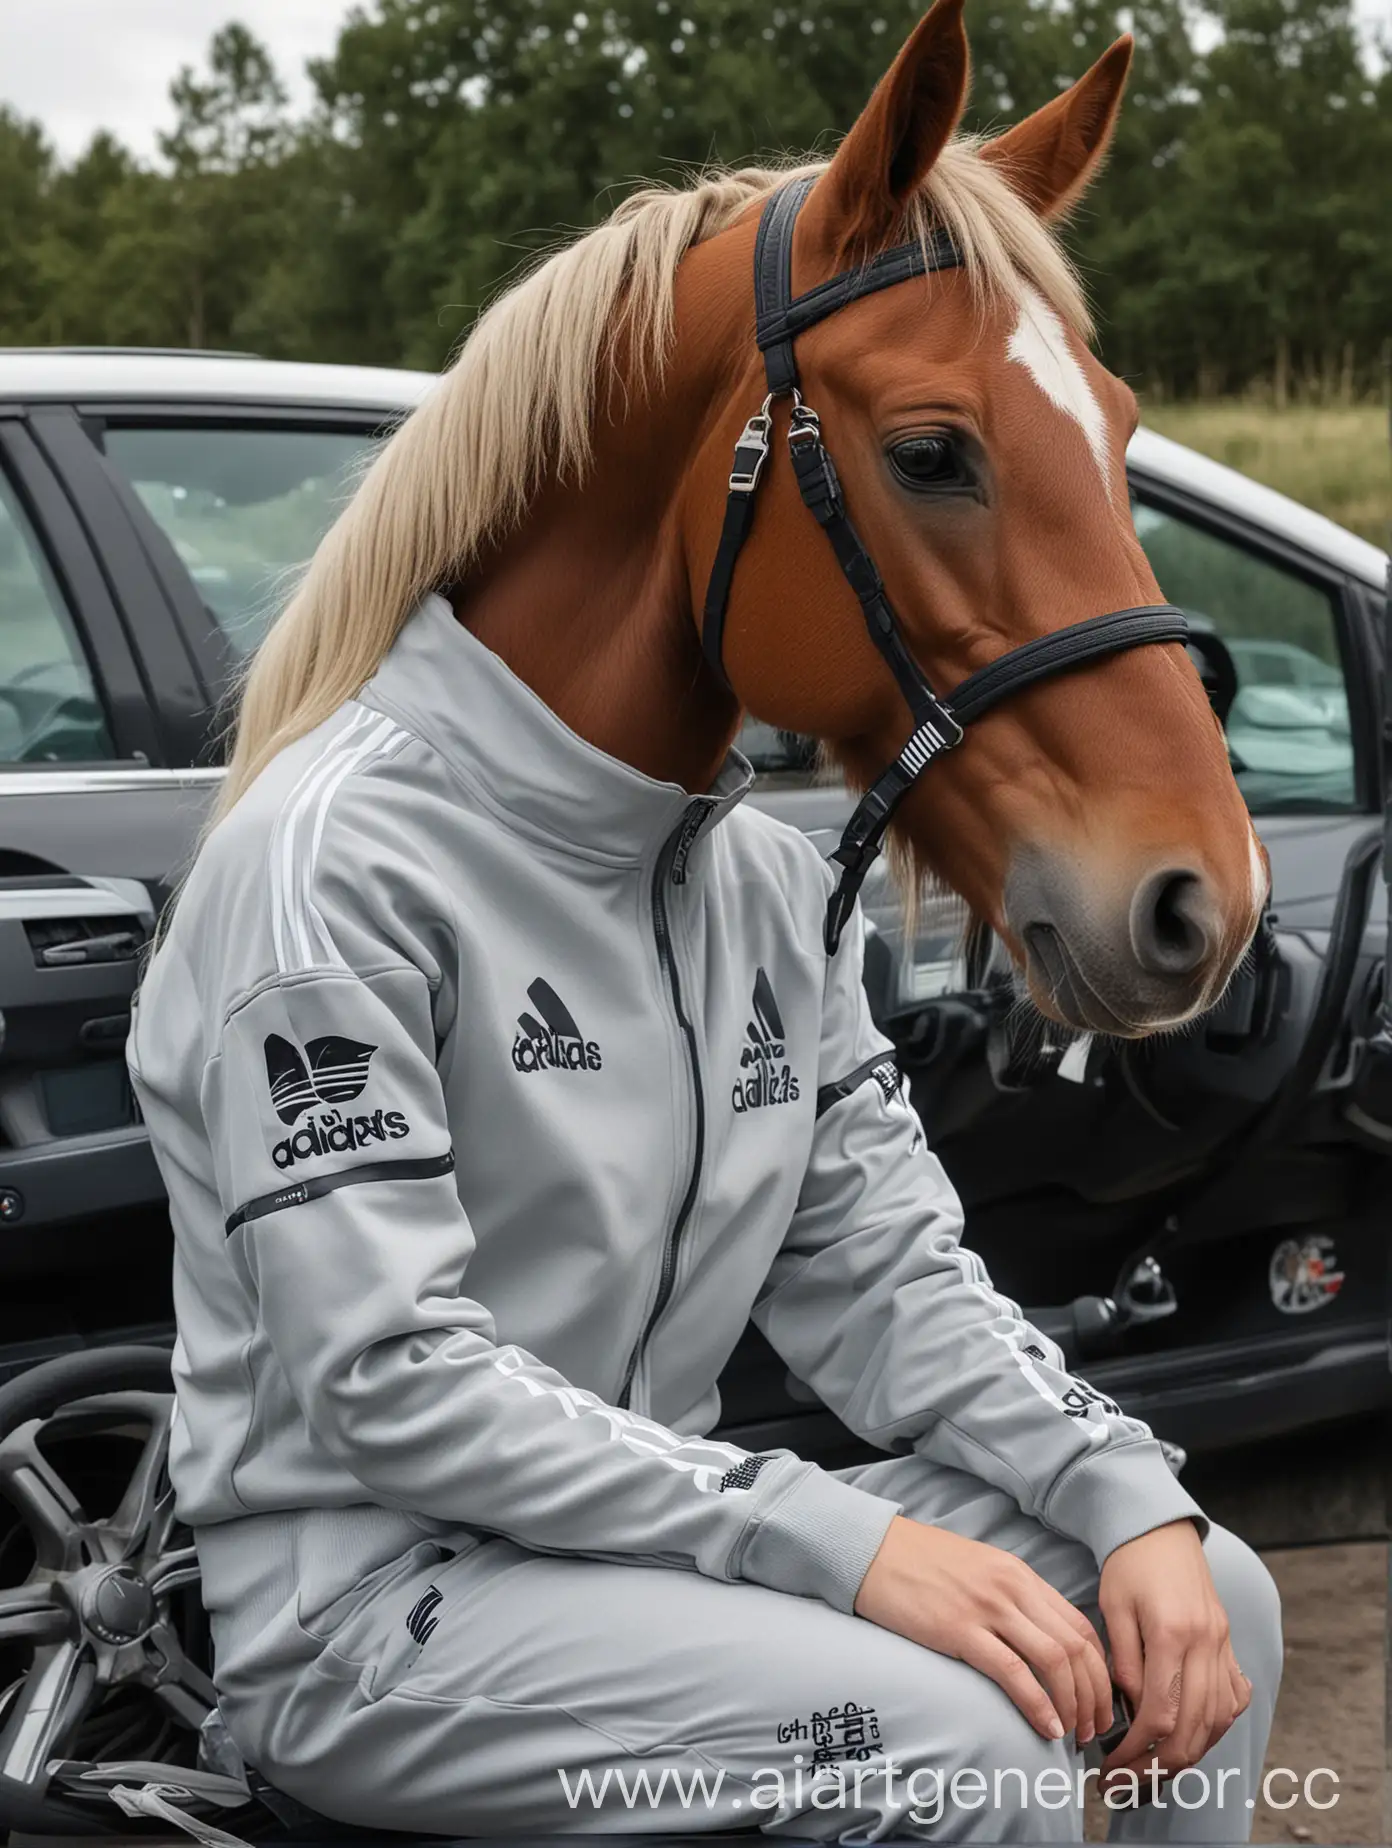 A horse in an Adidas tracksuit, sitting behind the wheel of a car, which also has Adidas logos on it.